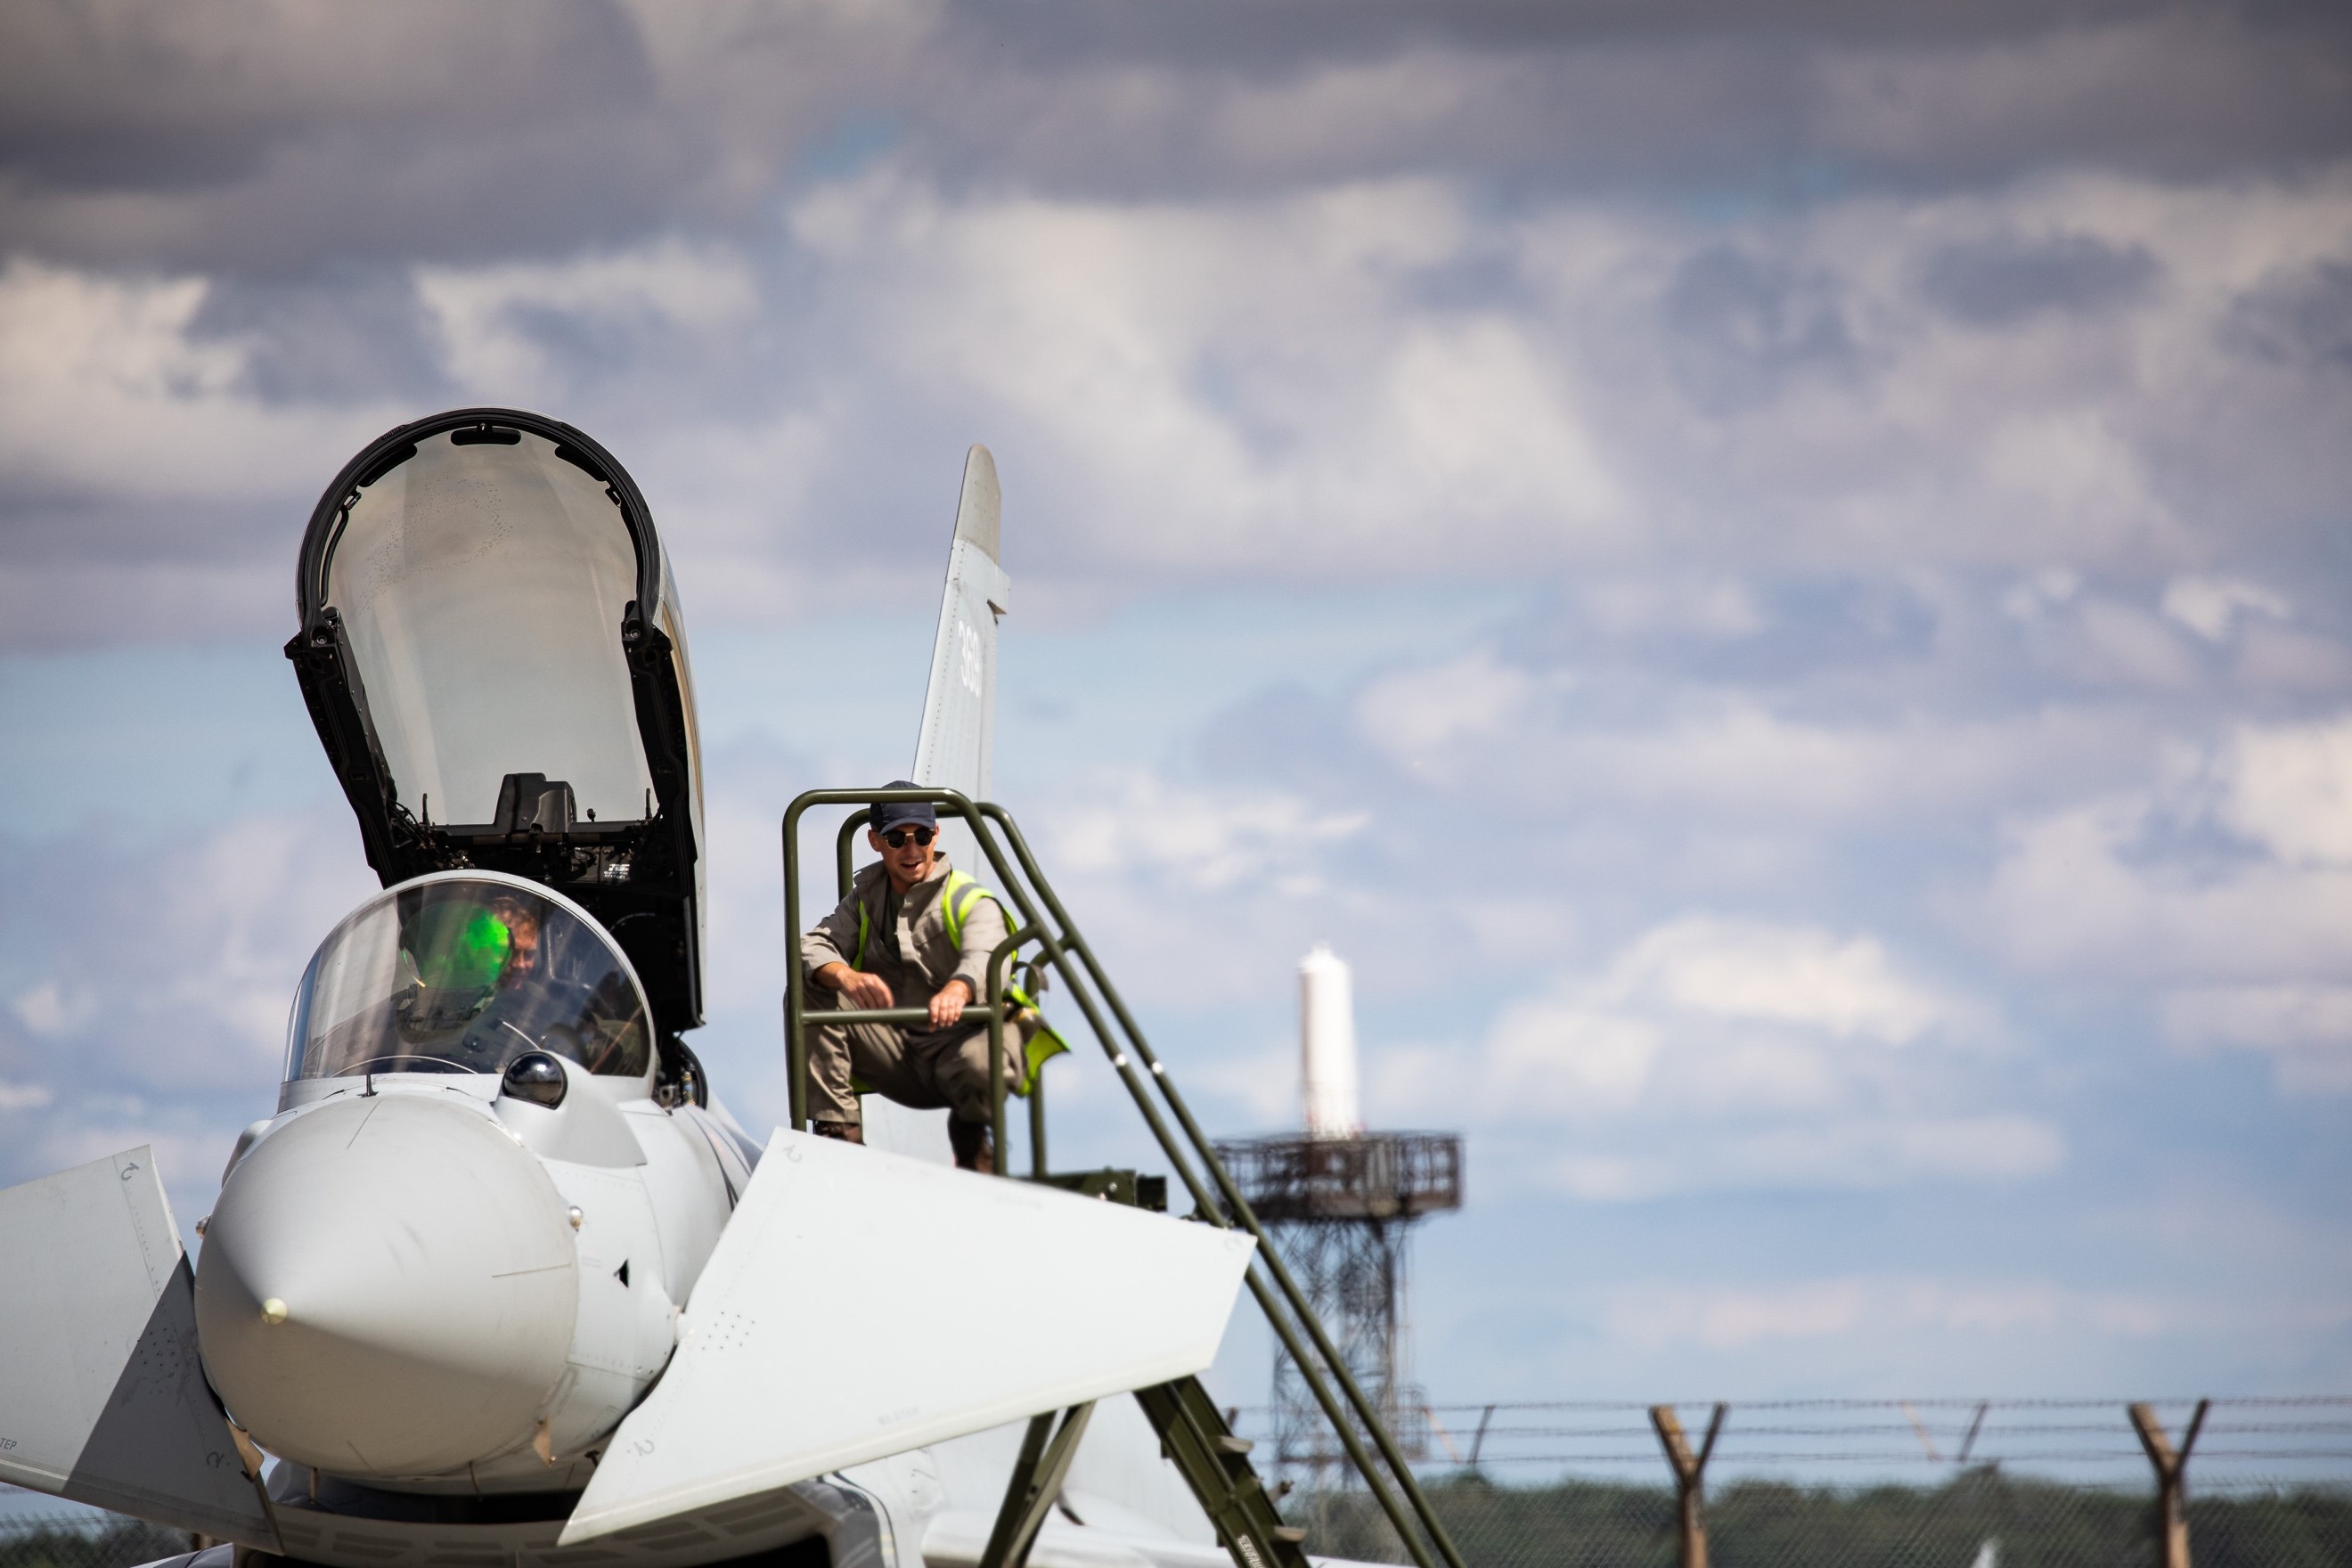 Image shows RAF Pilots with Typhoon on the airfield.